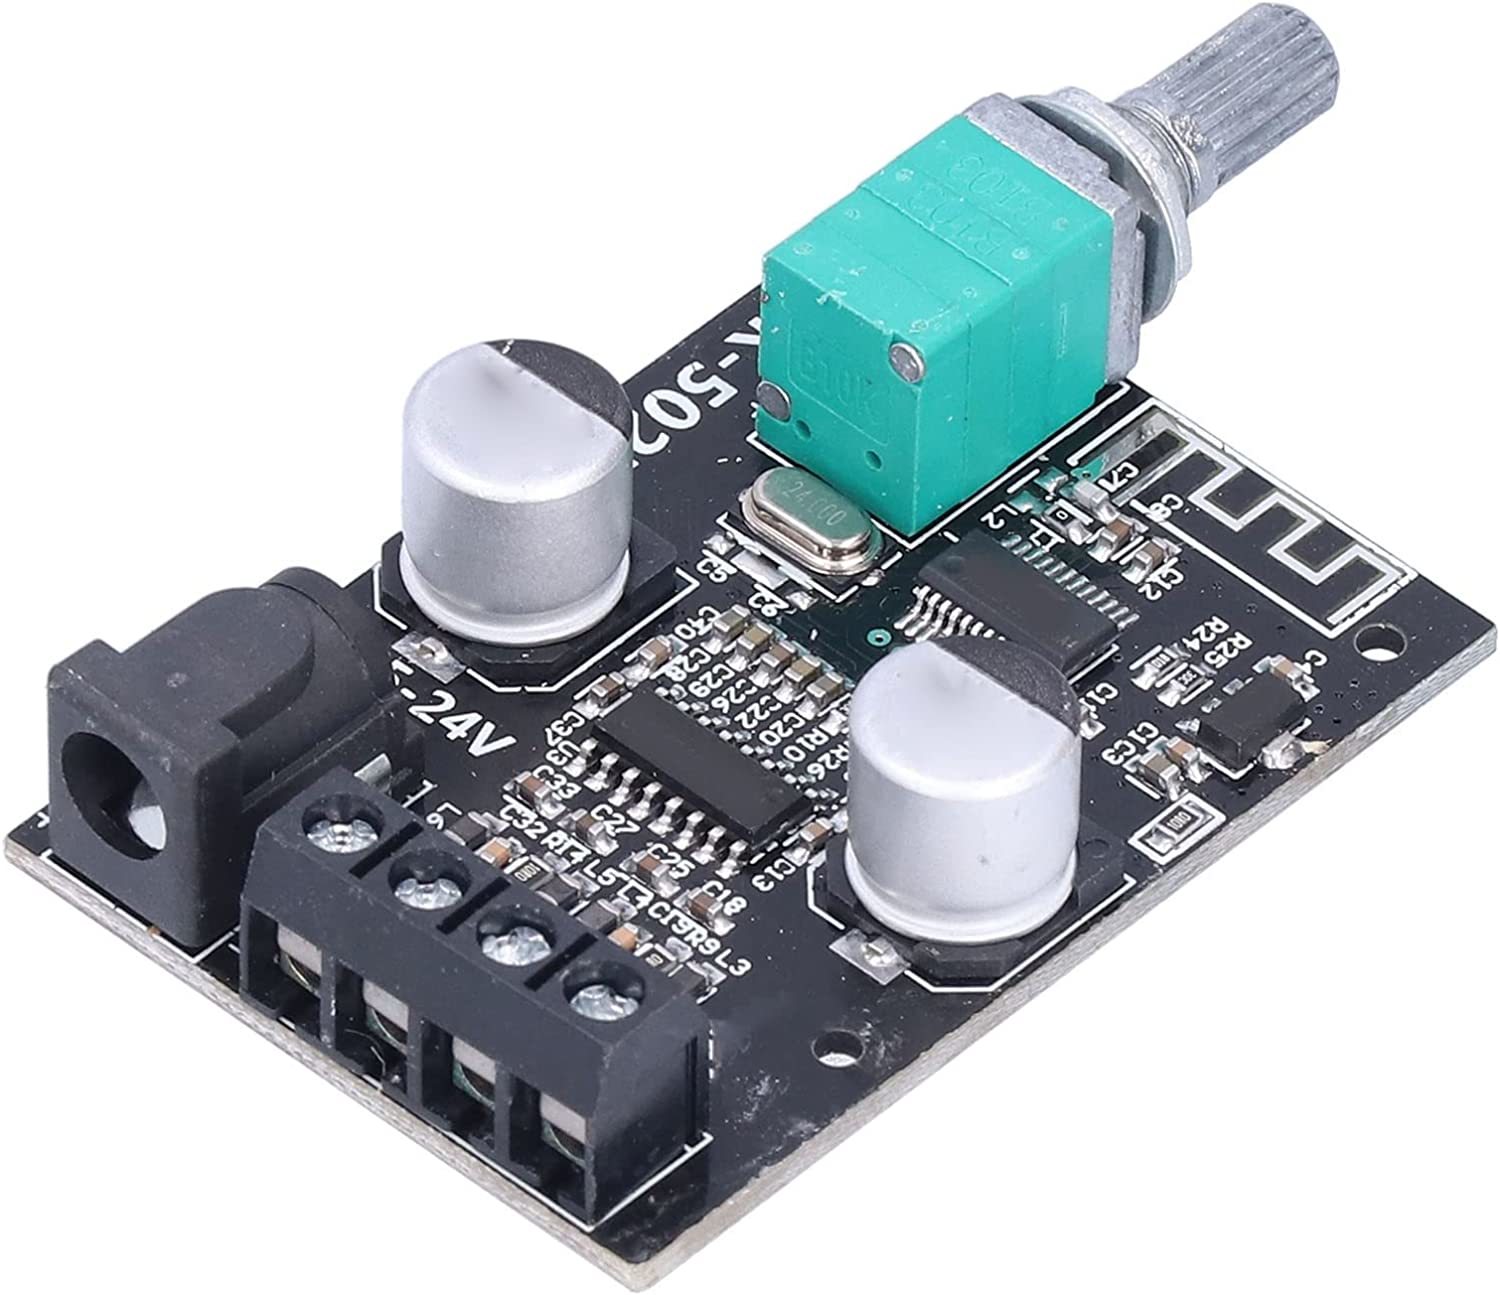 Primary image for Zk‑502L Bluetooth Power Amplifier Board 5.0 Stereo Audio Receiver Dual, 24V